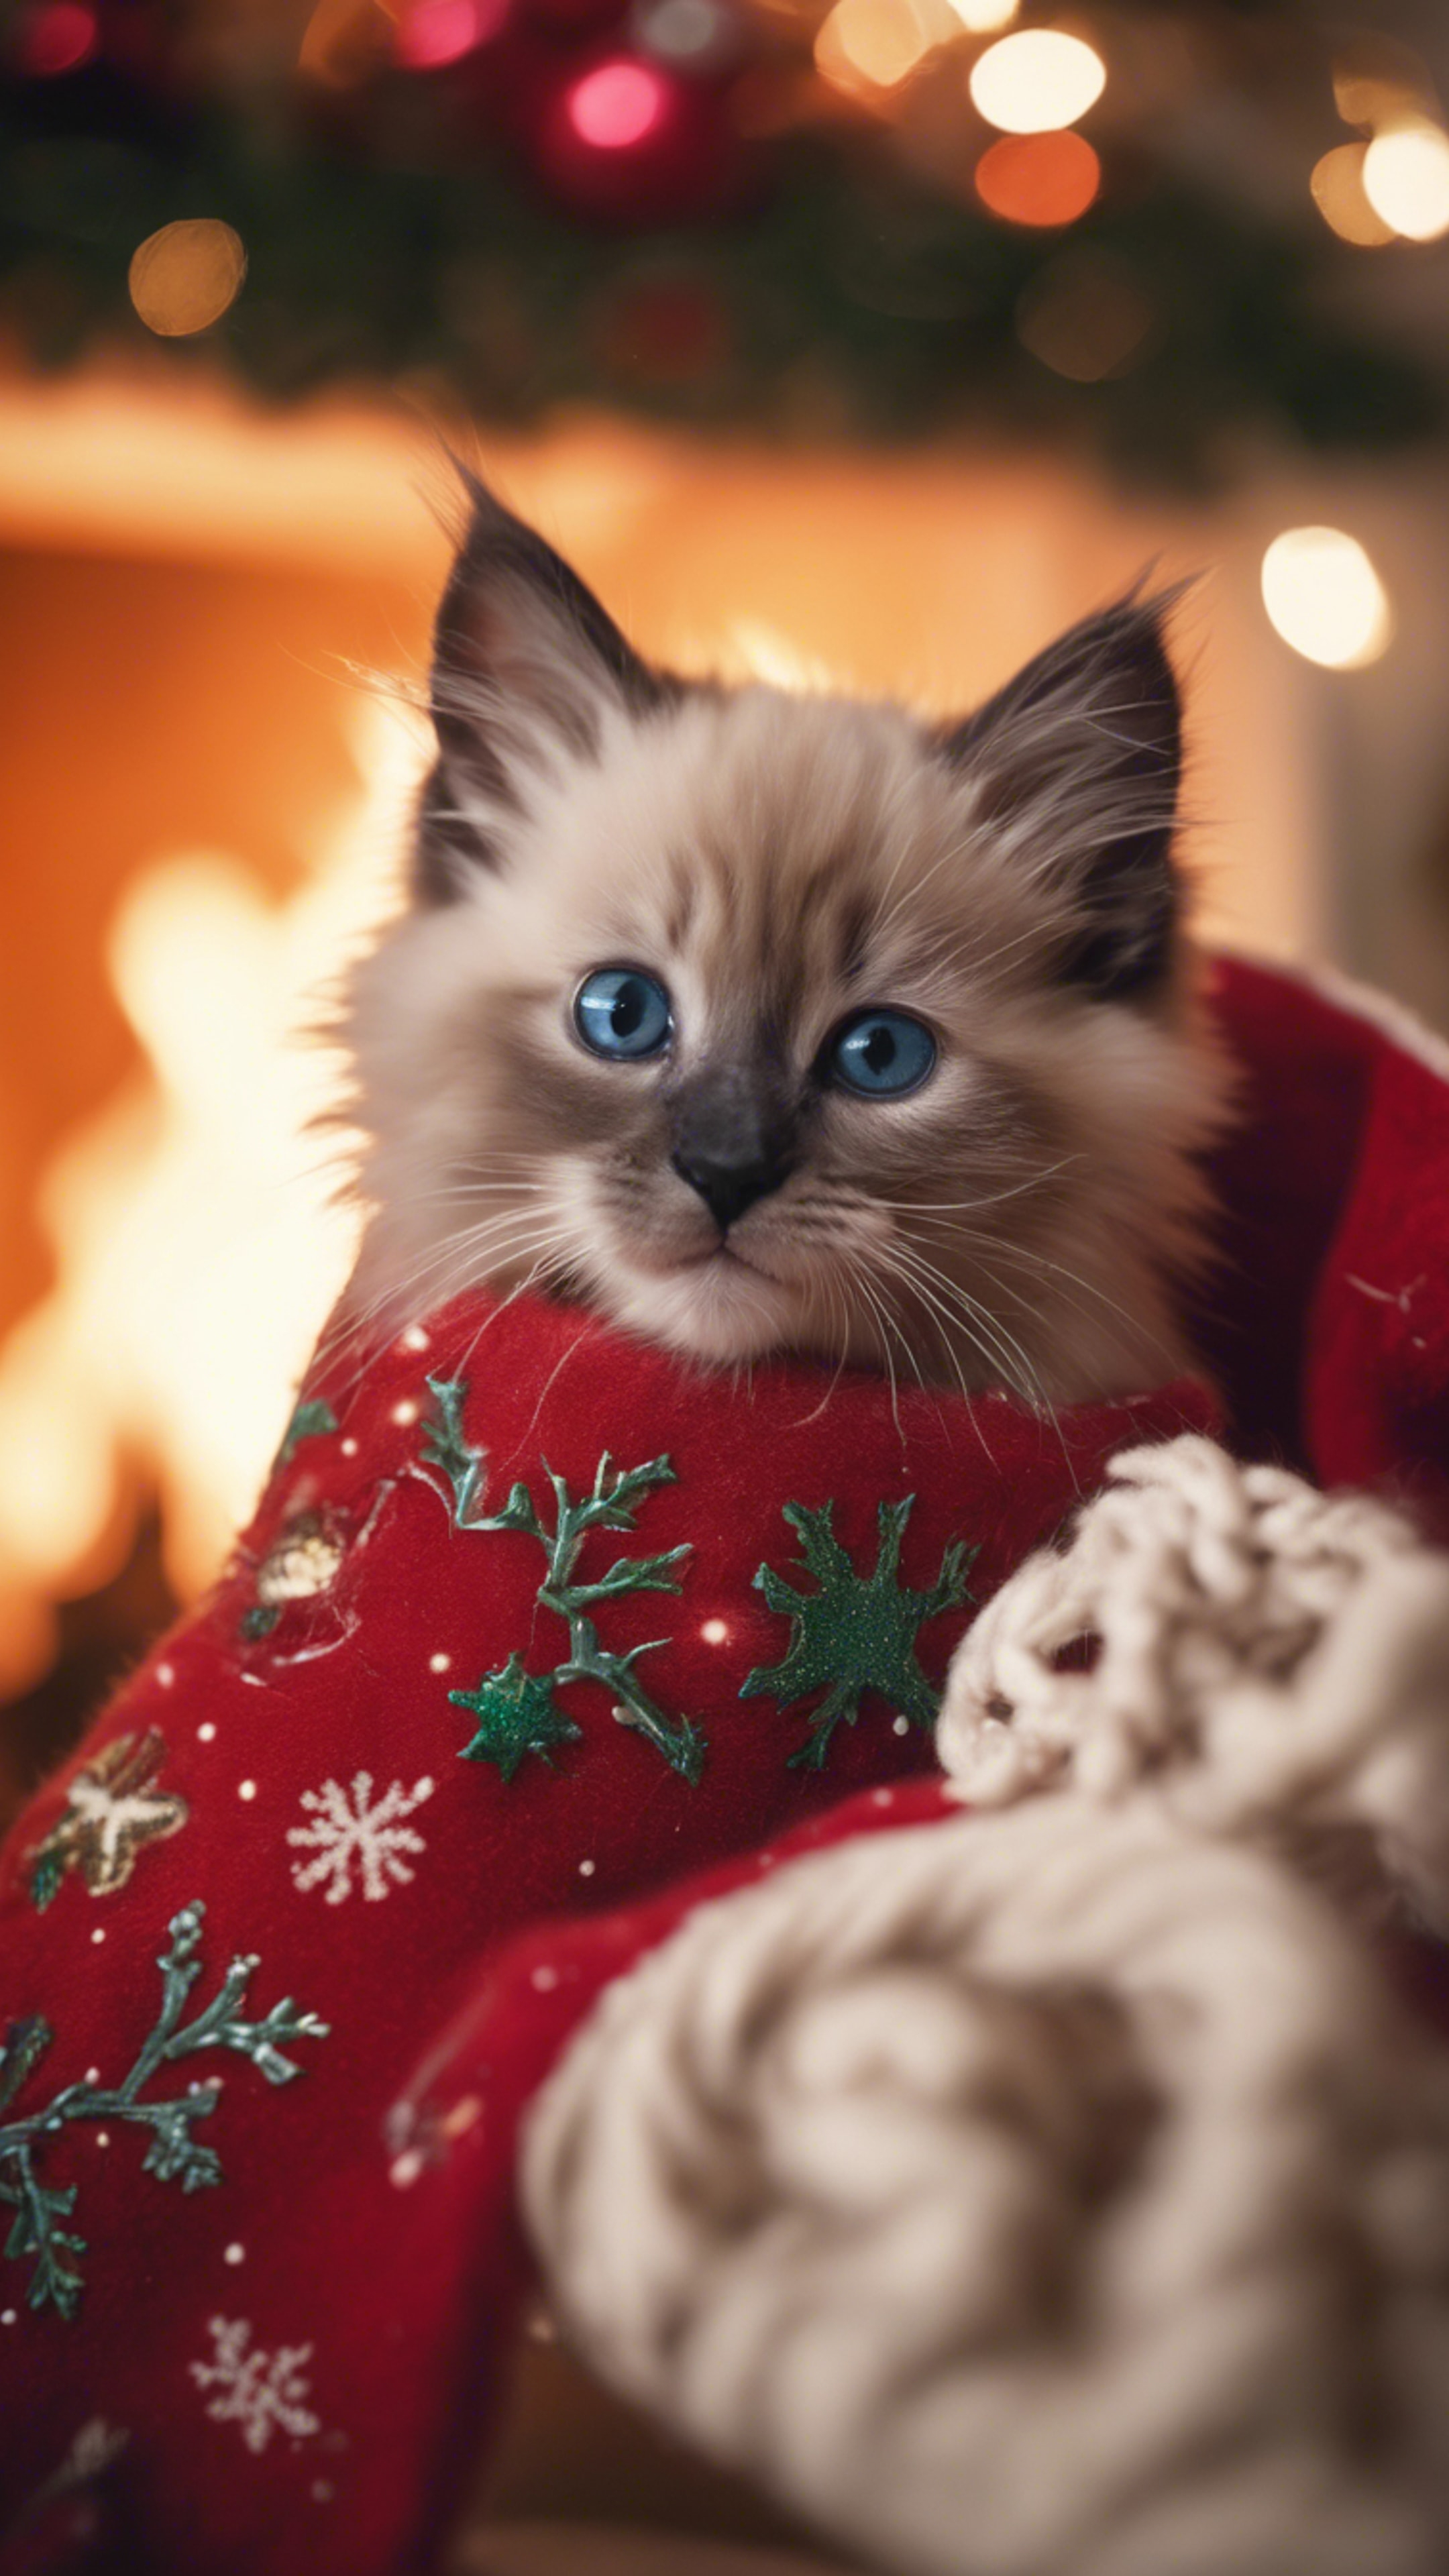 A Ragdoll kitten snuggled up inside a comfortable Christmas stocking hung by the fireplace.壁紙[60bf4a886ae44ca4b8e7]